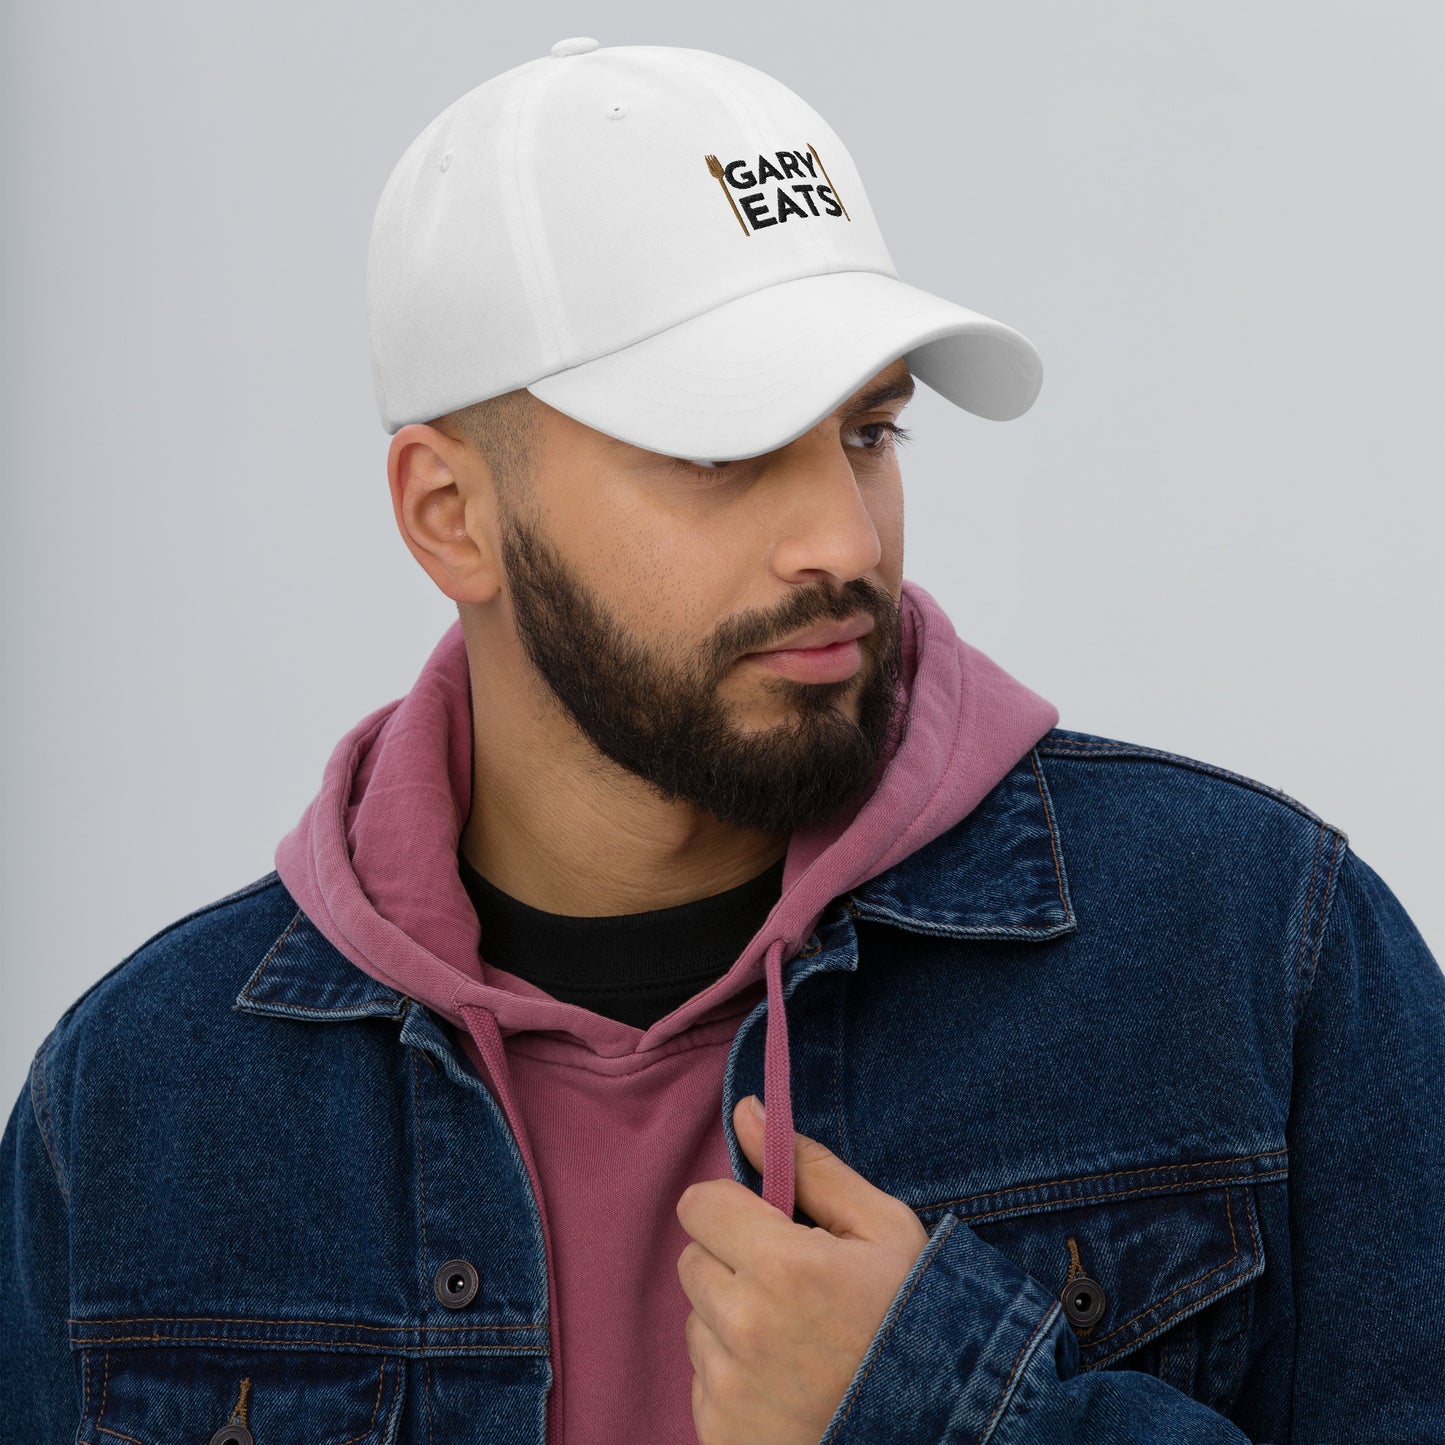 Gary Eats Embroidered Unisex Cap